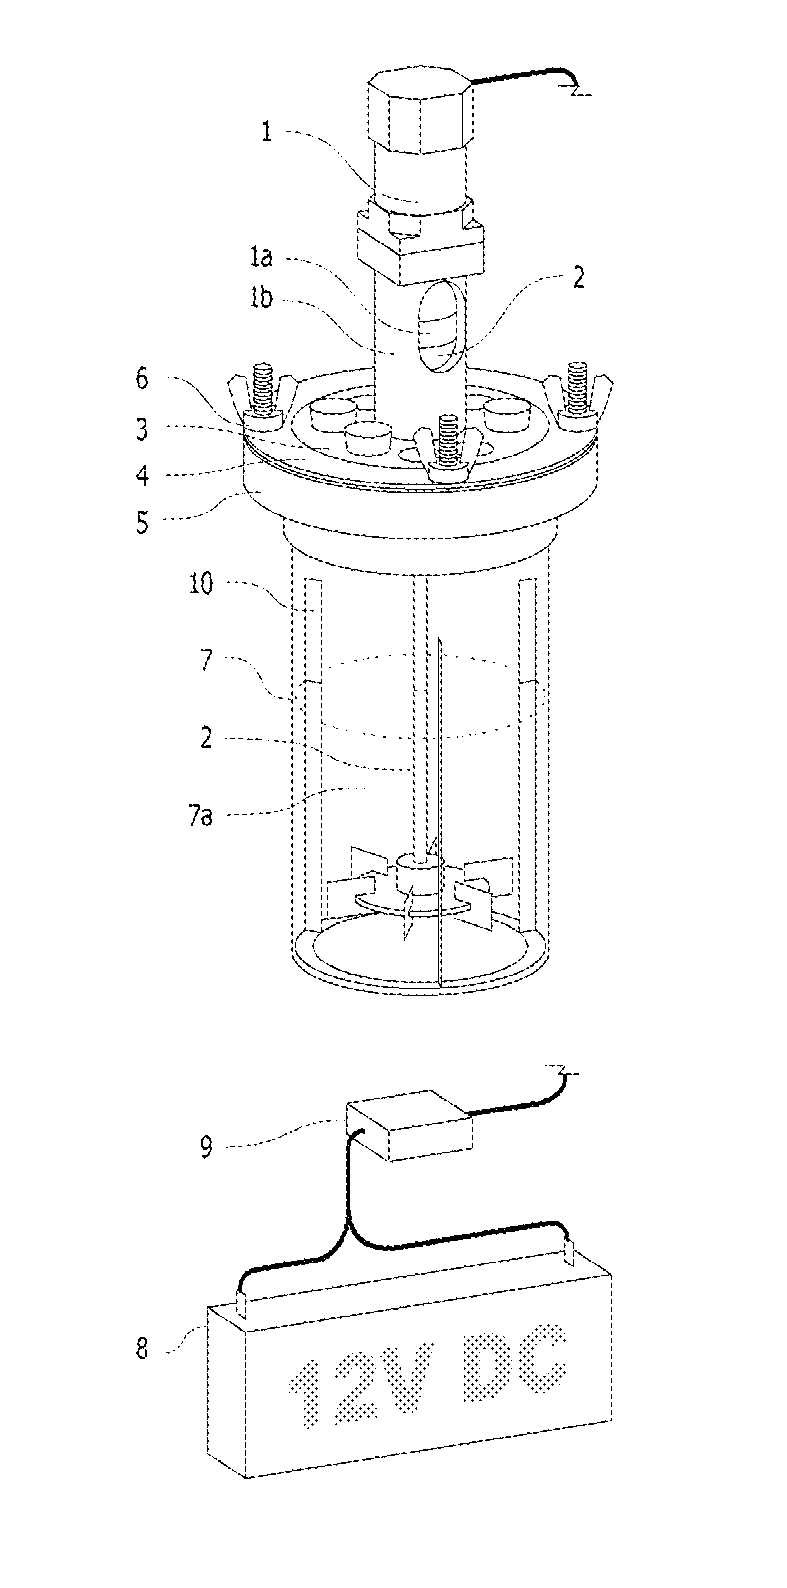 Portable DC motor driven laboratory assembly for uninterrupted stirred processes